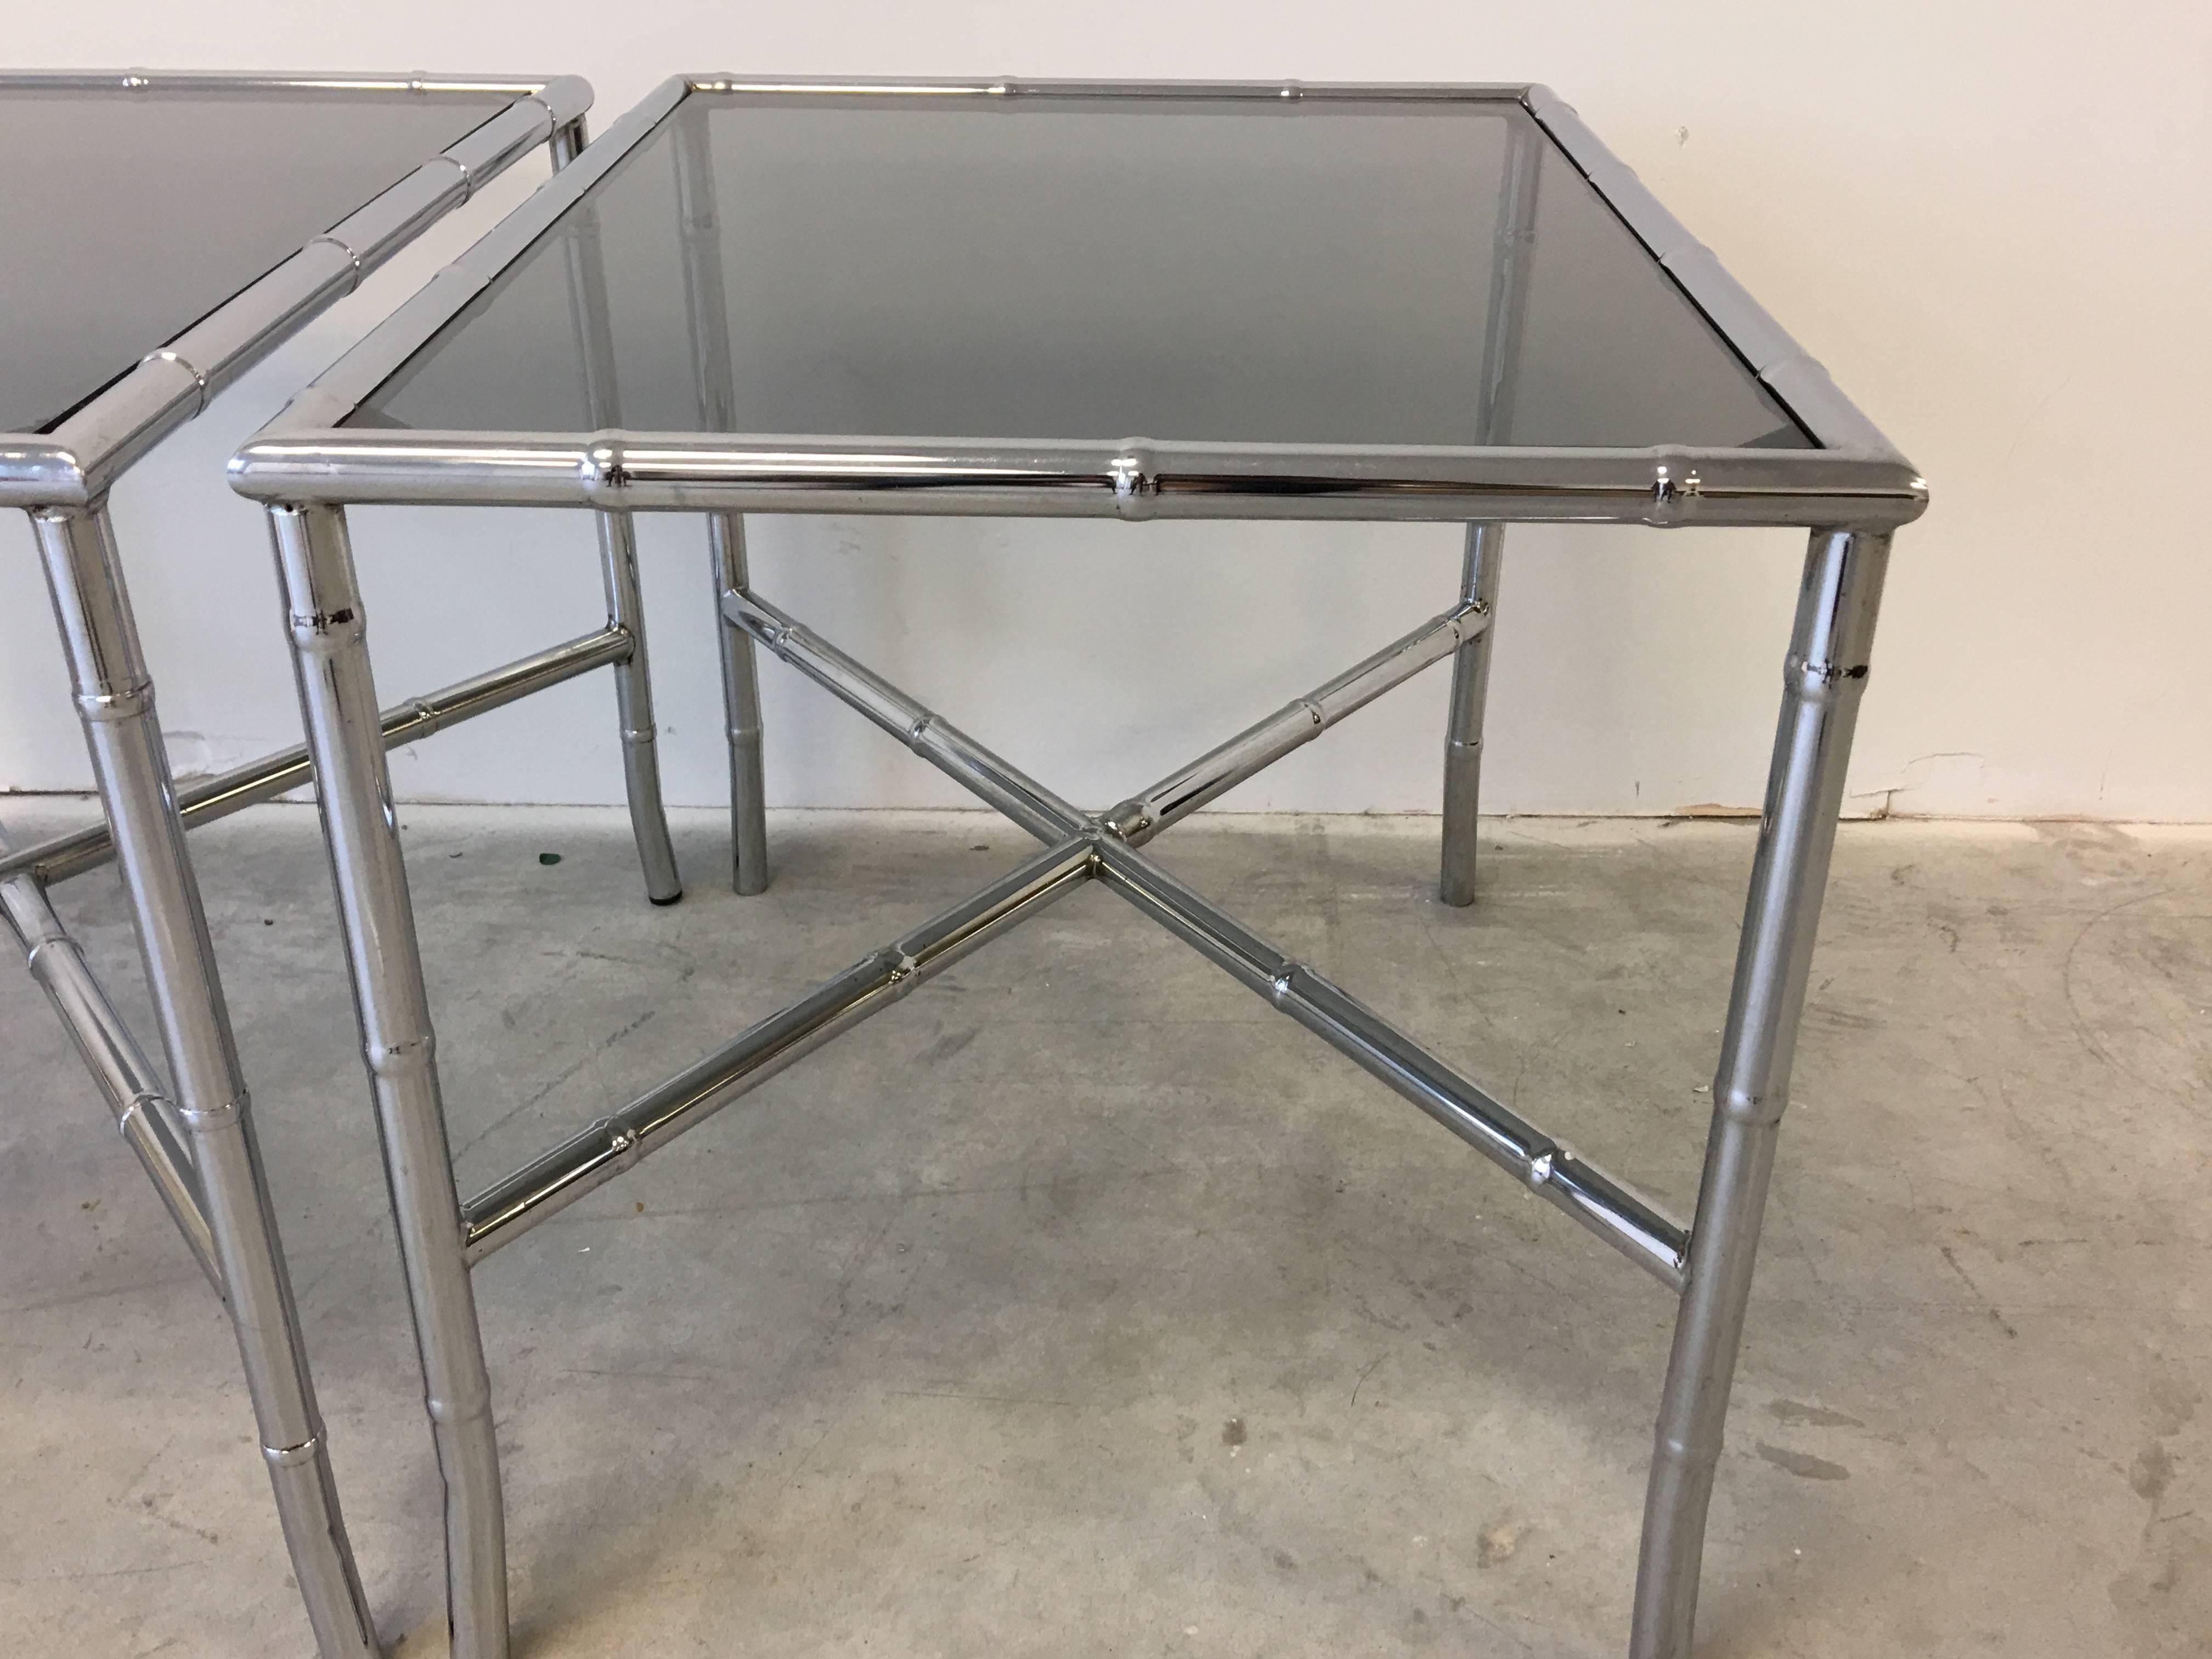 Polished 1970s Chrome Faux Bamboo Side Tables with Smoked Glass, Pair